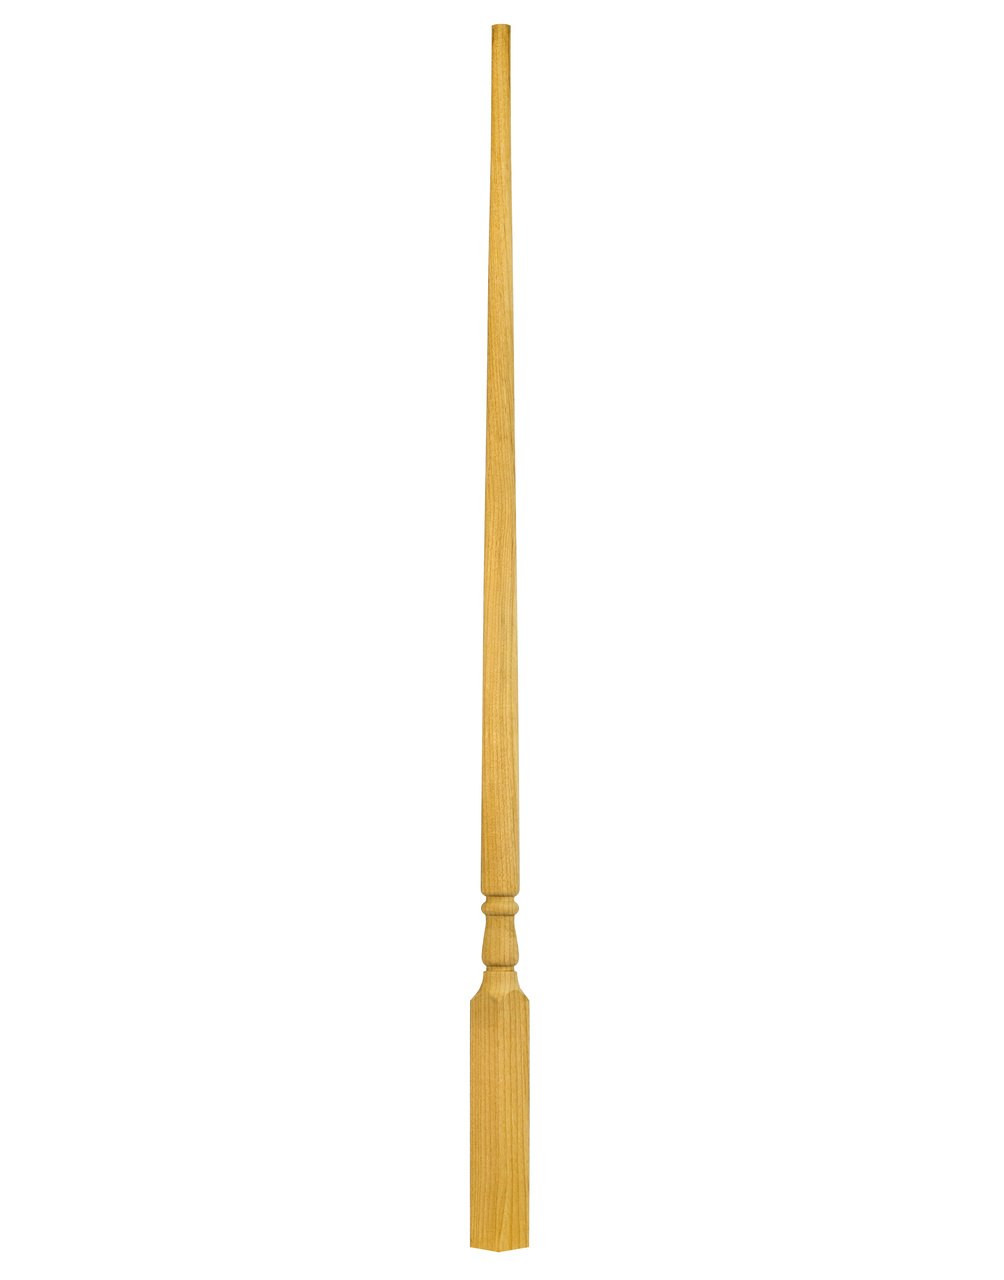 C-5015 39" Colonial Baluster (3)